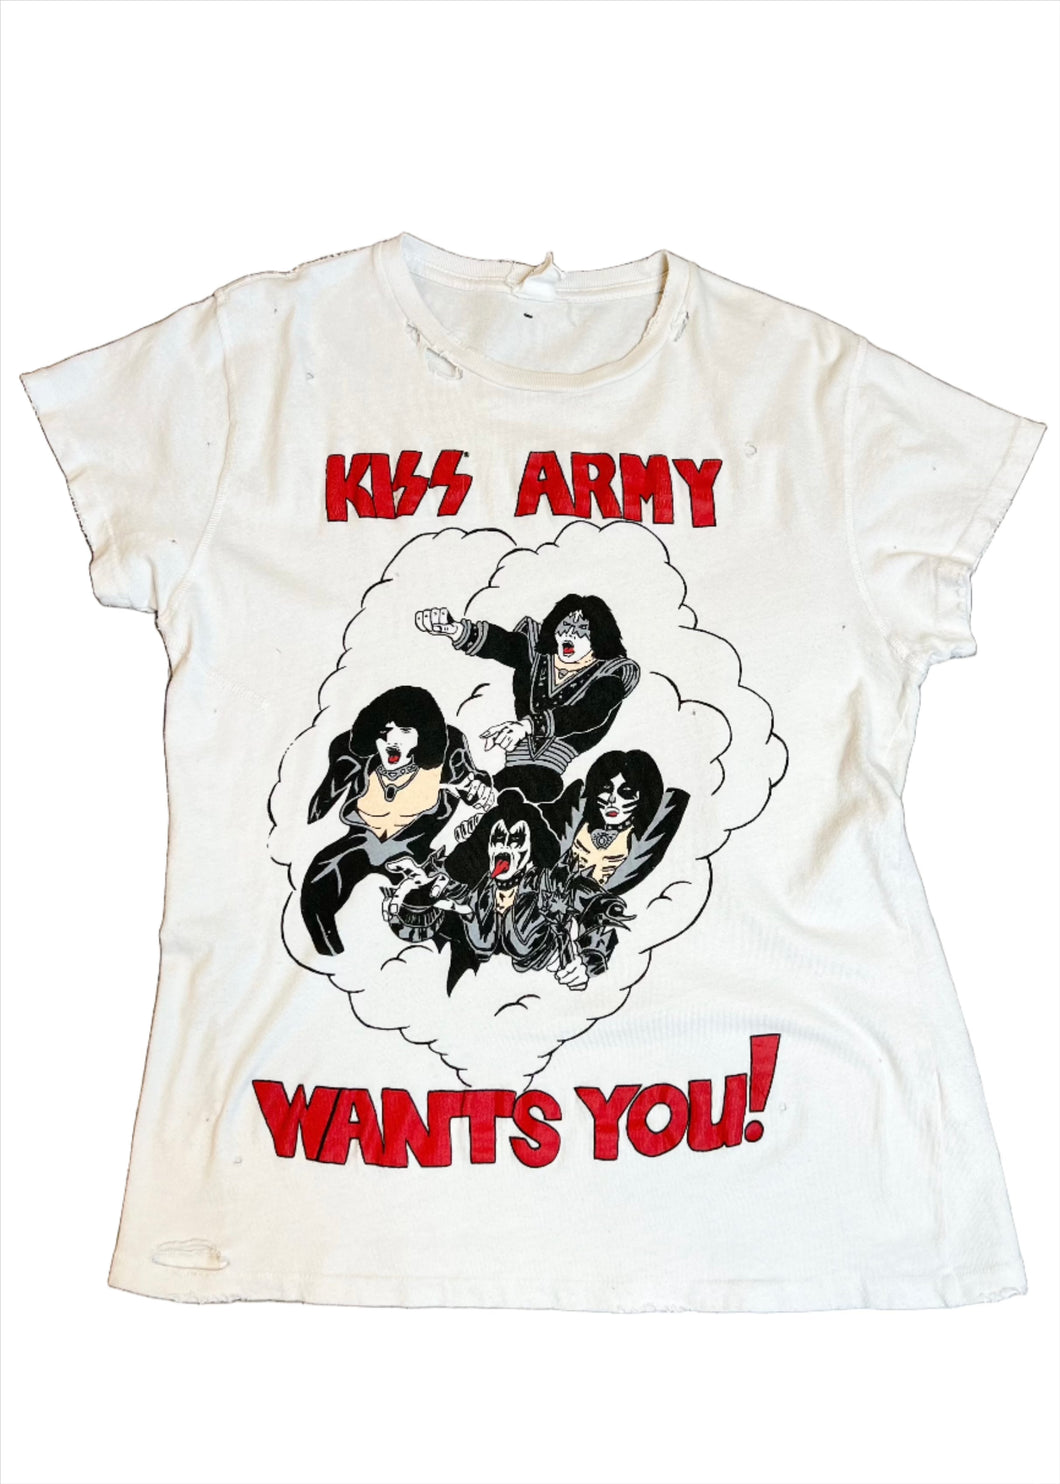 Kiss Army Wants You! Madeworn Band tee, available at west2westport.com